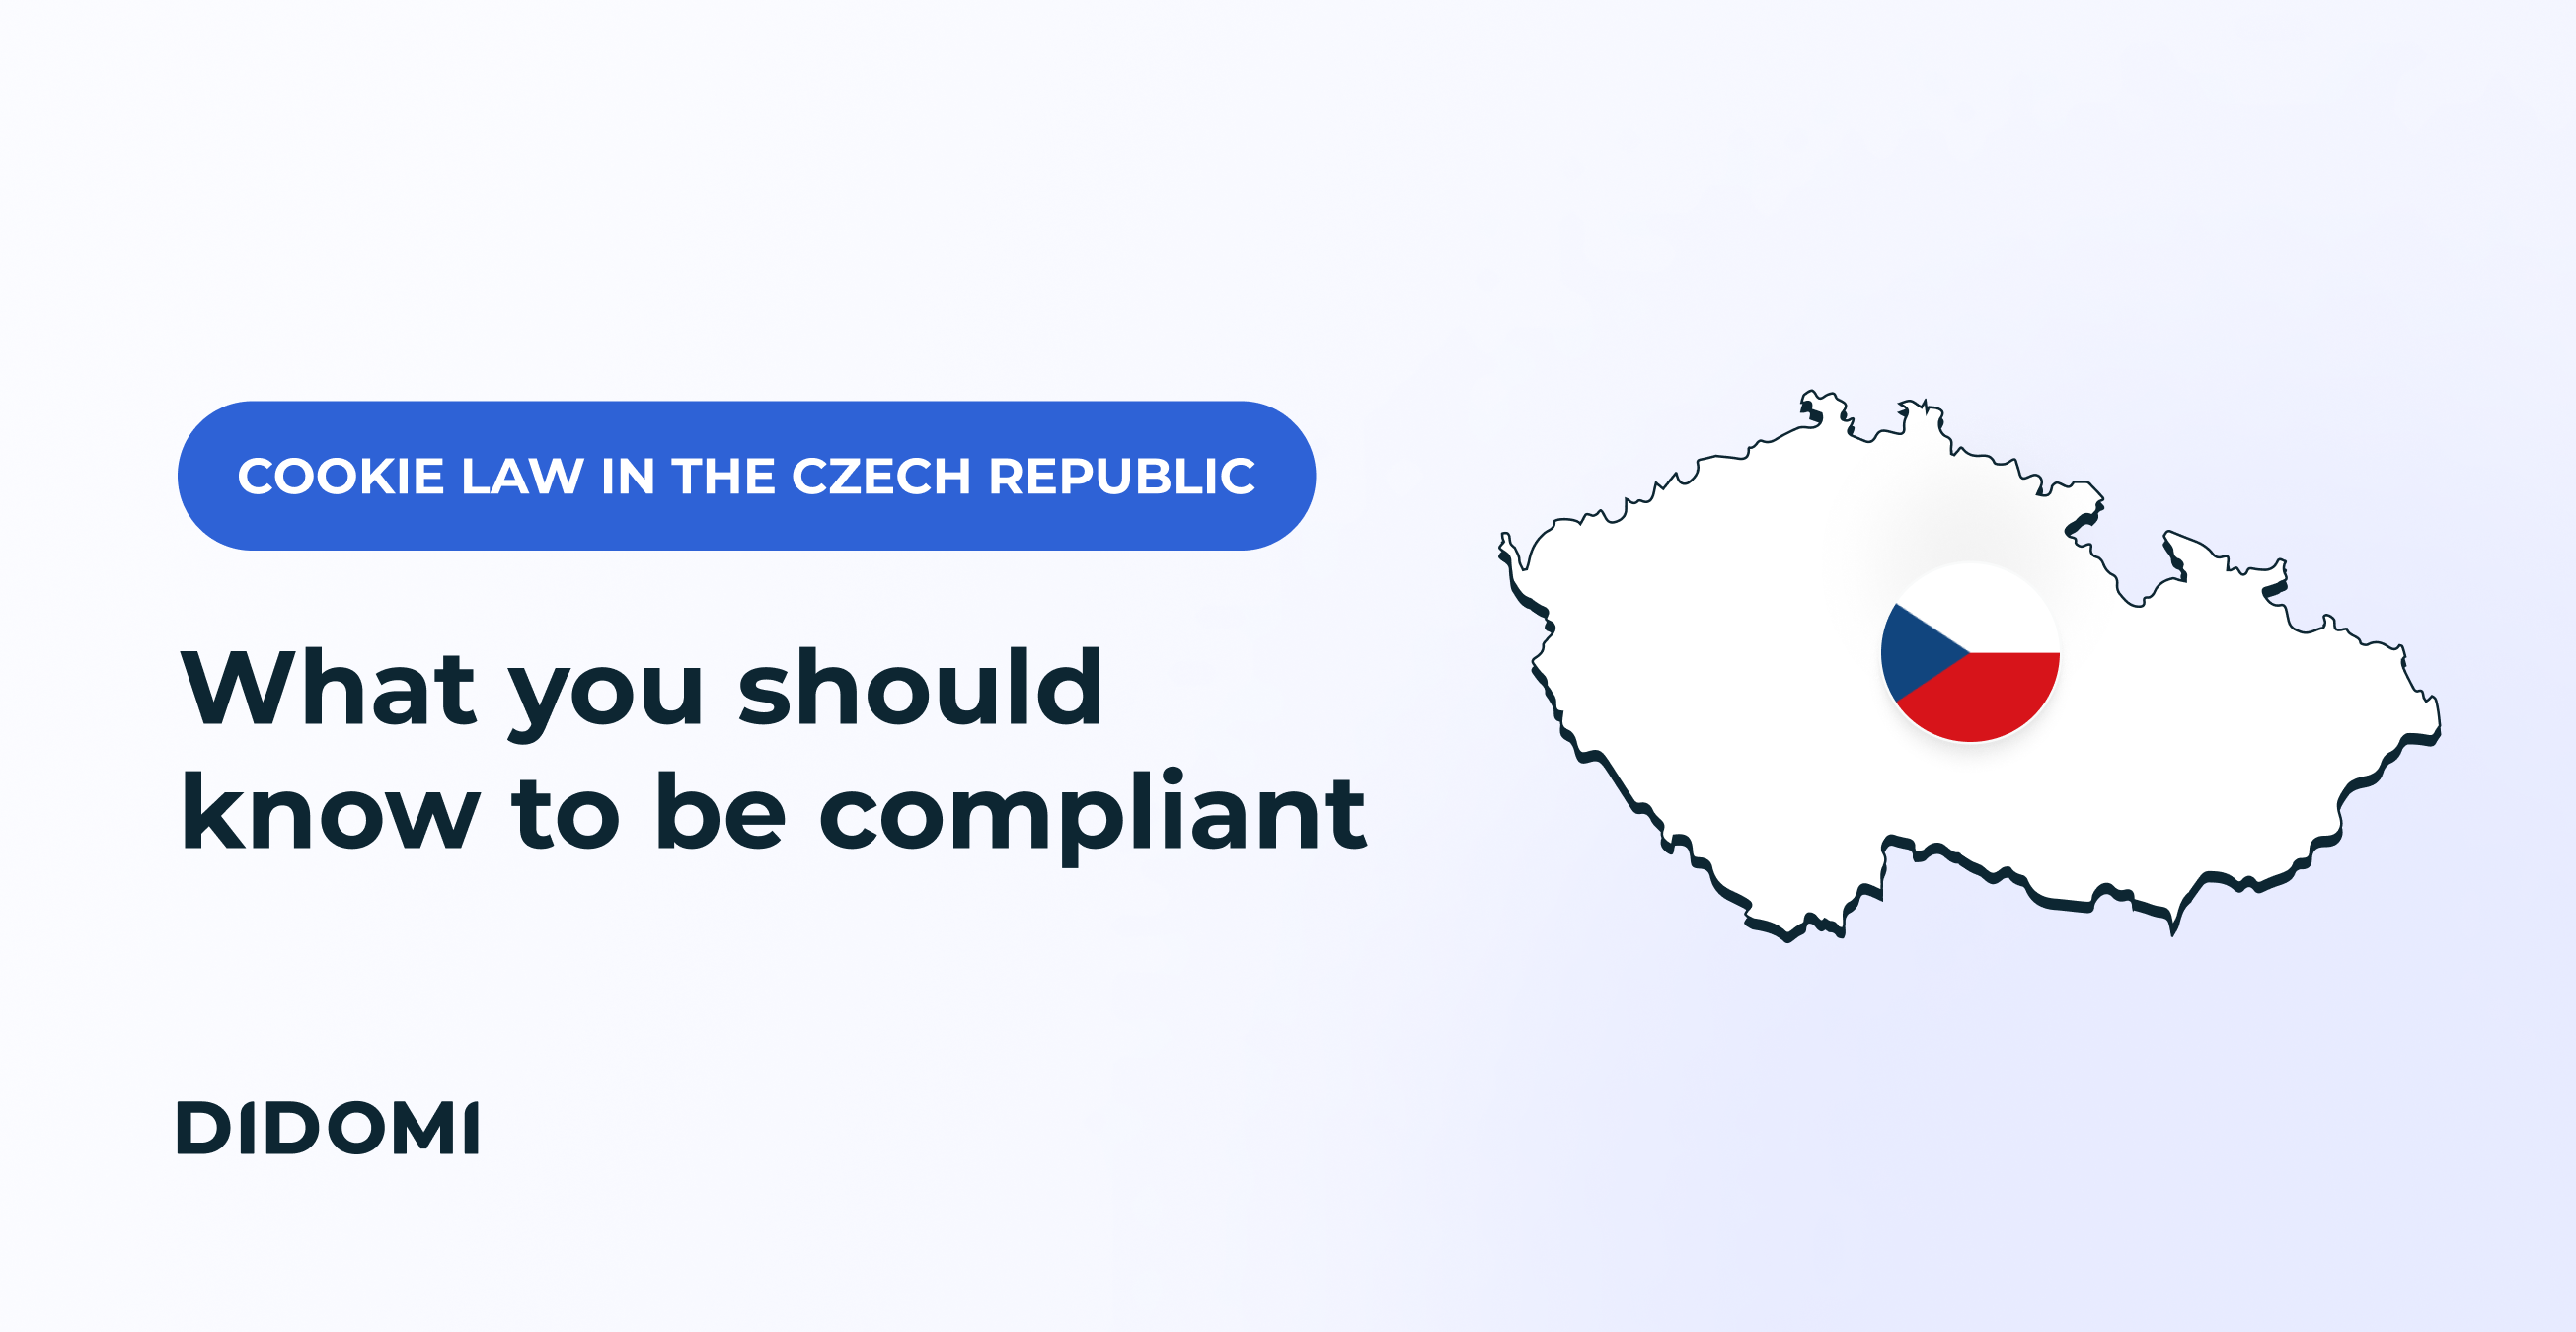 Cookie law in Czech Republic: What you need to know